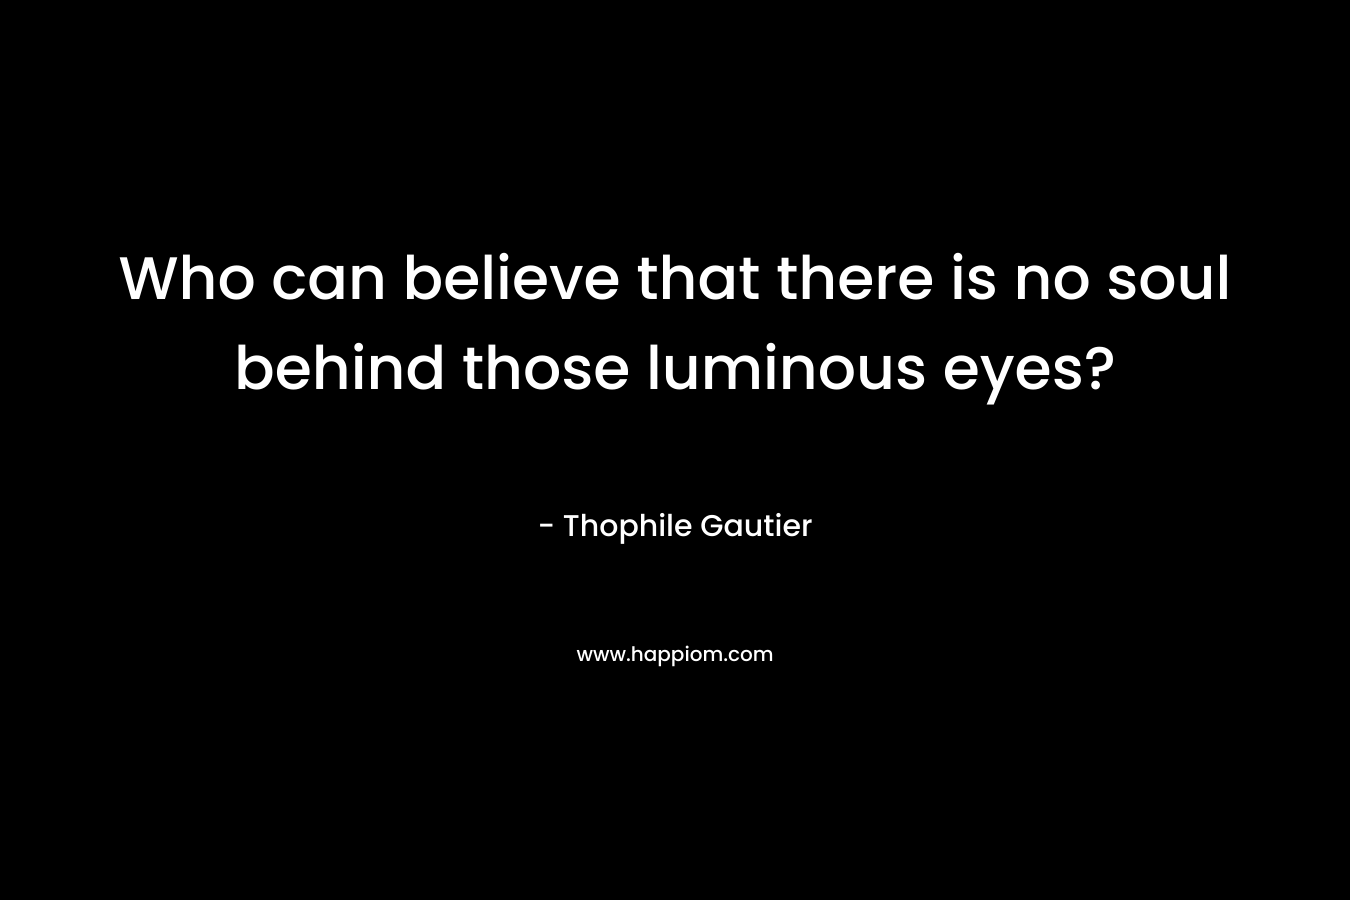 Who can believe that there is no soul behind those luminous eyes? – Thophile Gautier